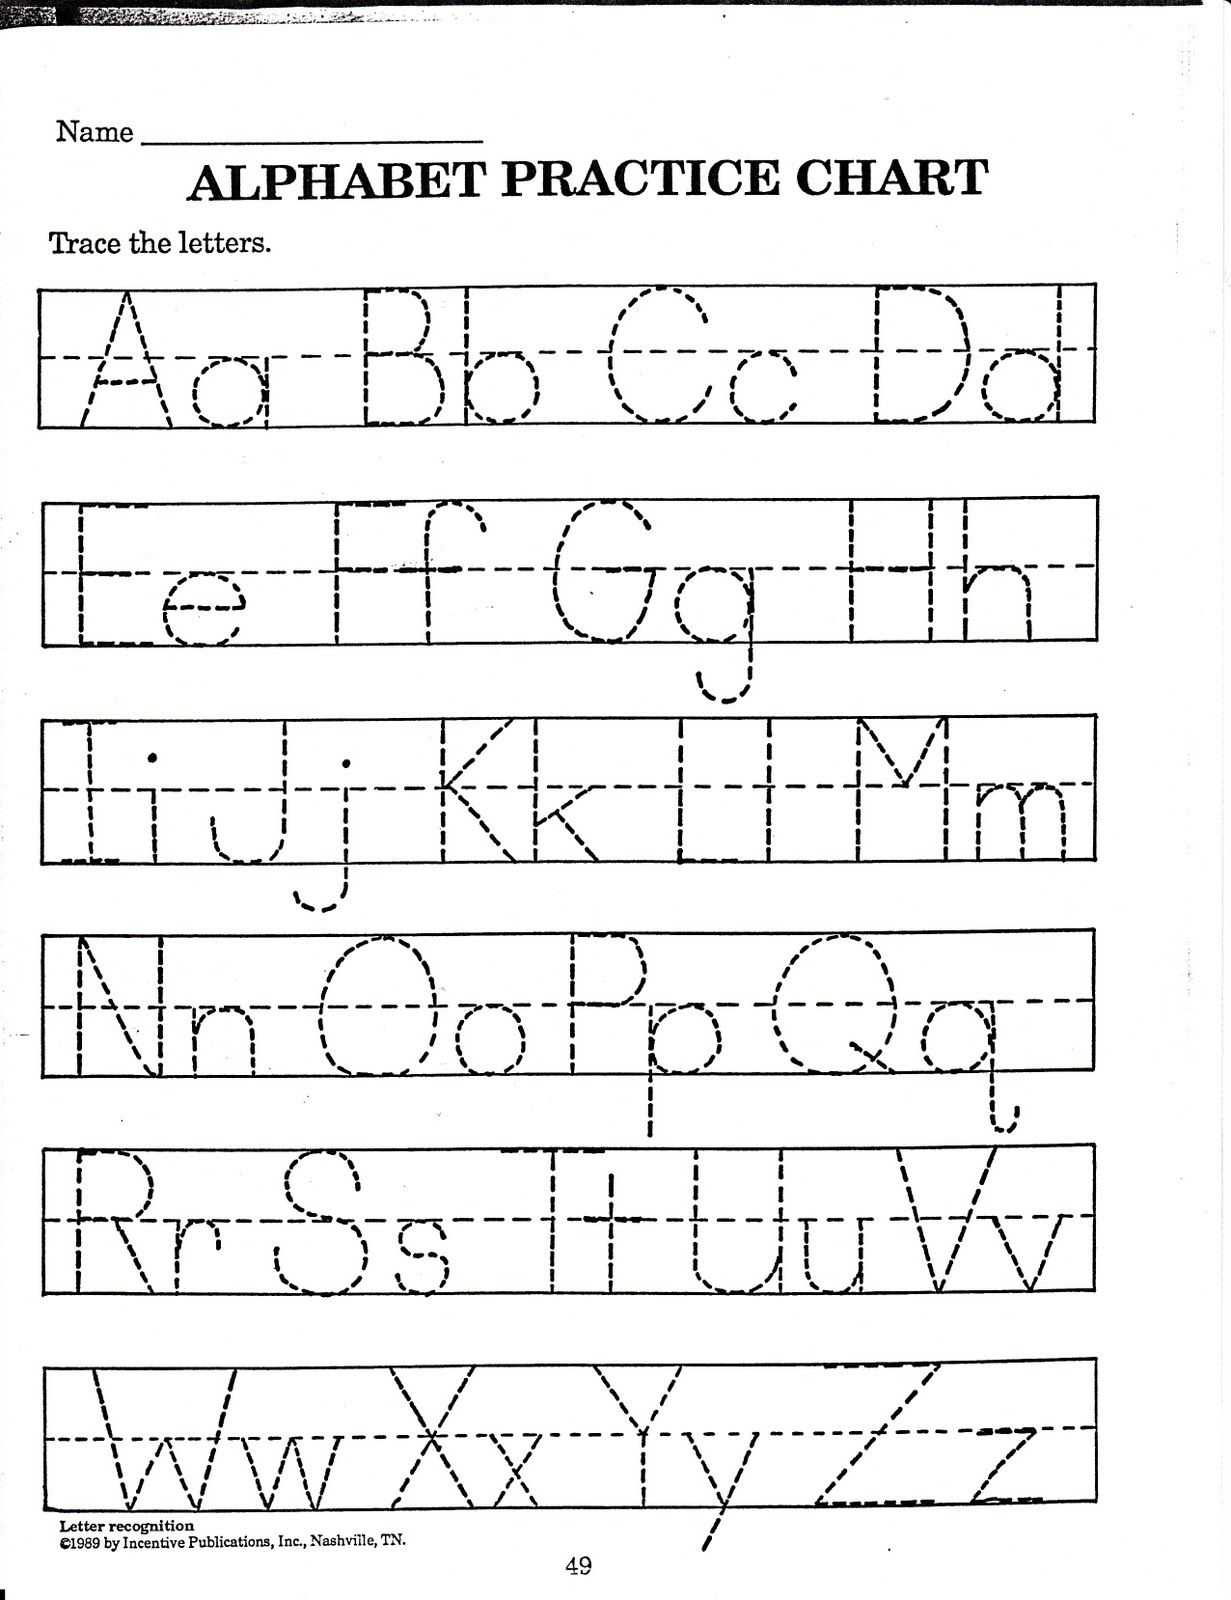 Reproducible Student Worksheet with Alphabet Activities & Book List for Your Classroom or Home Use